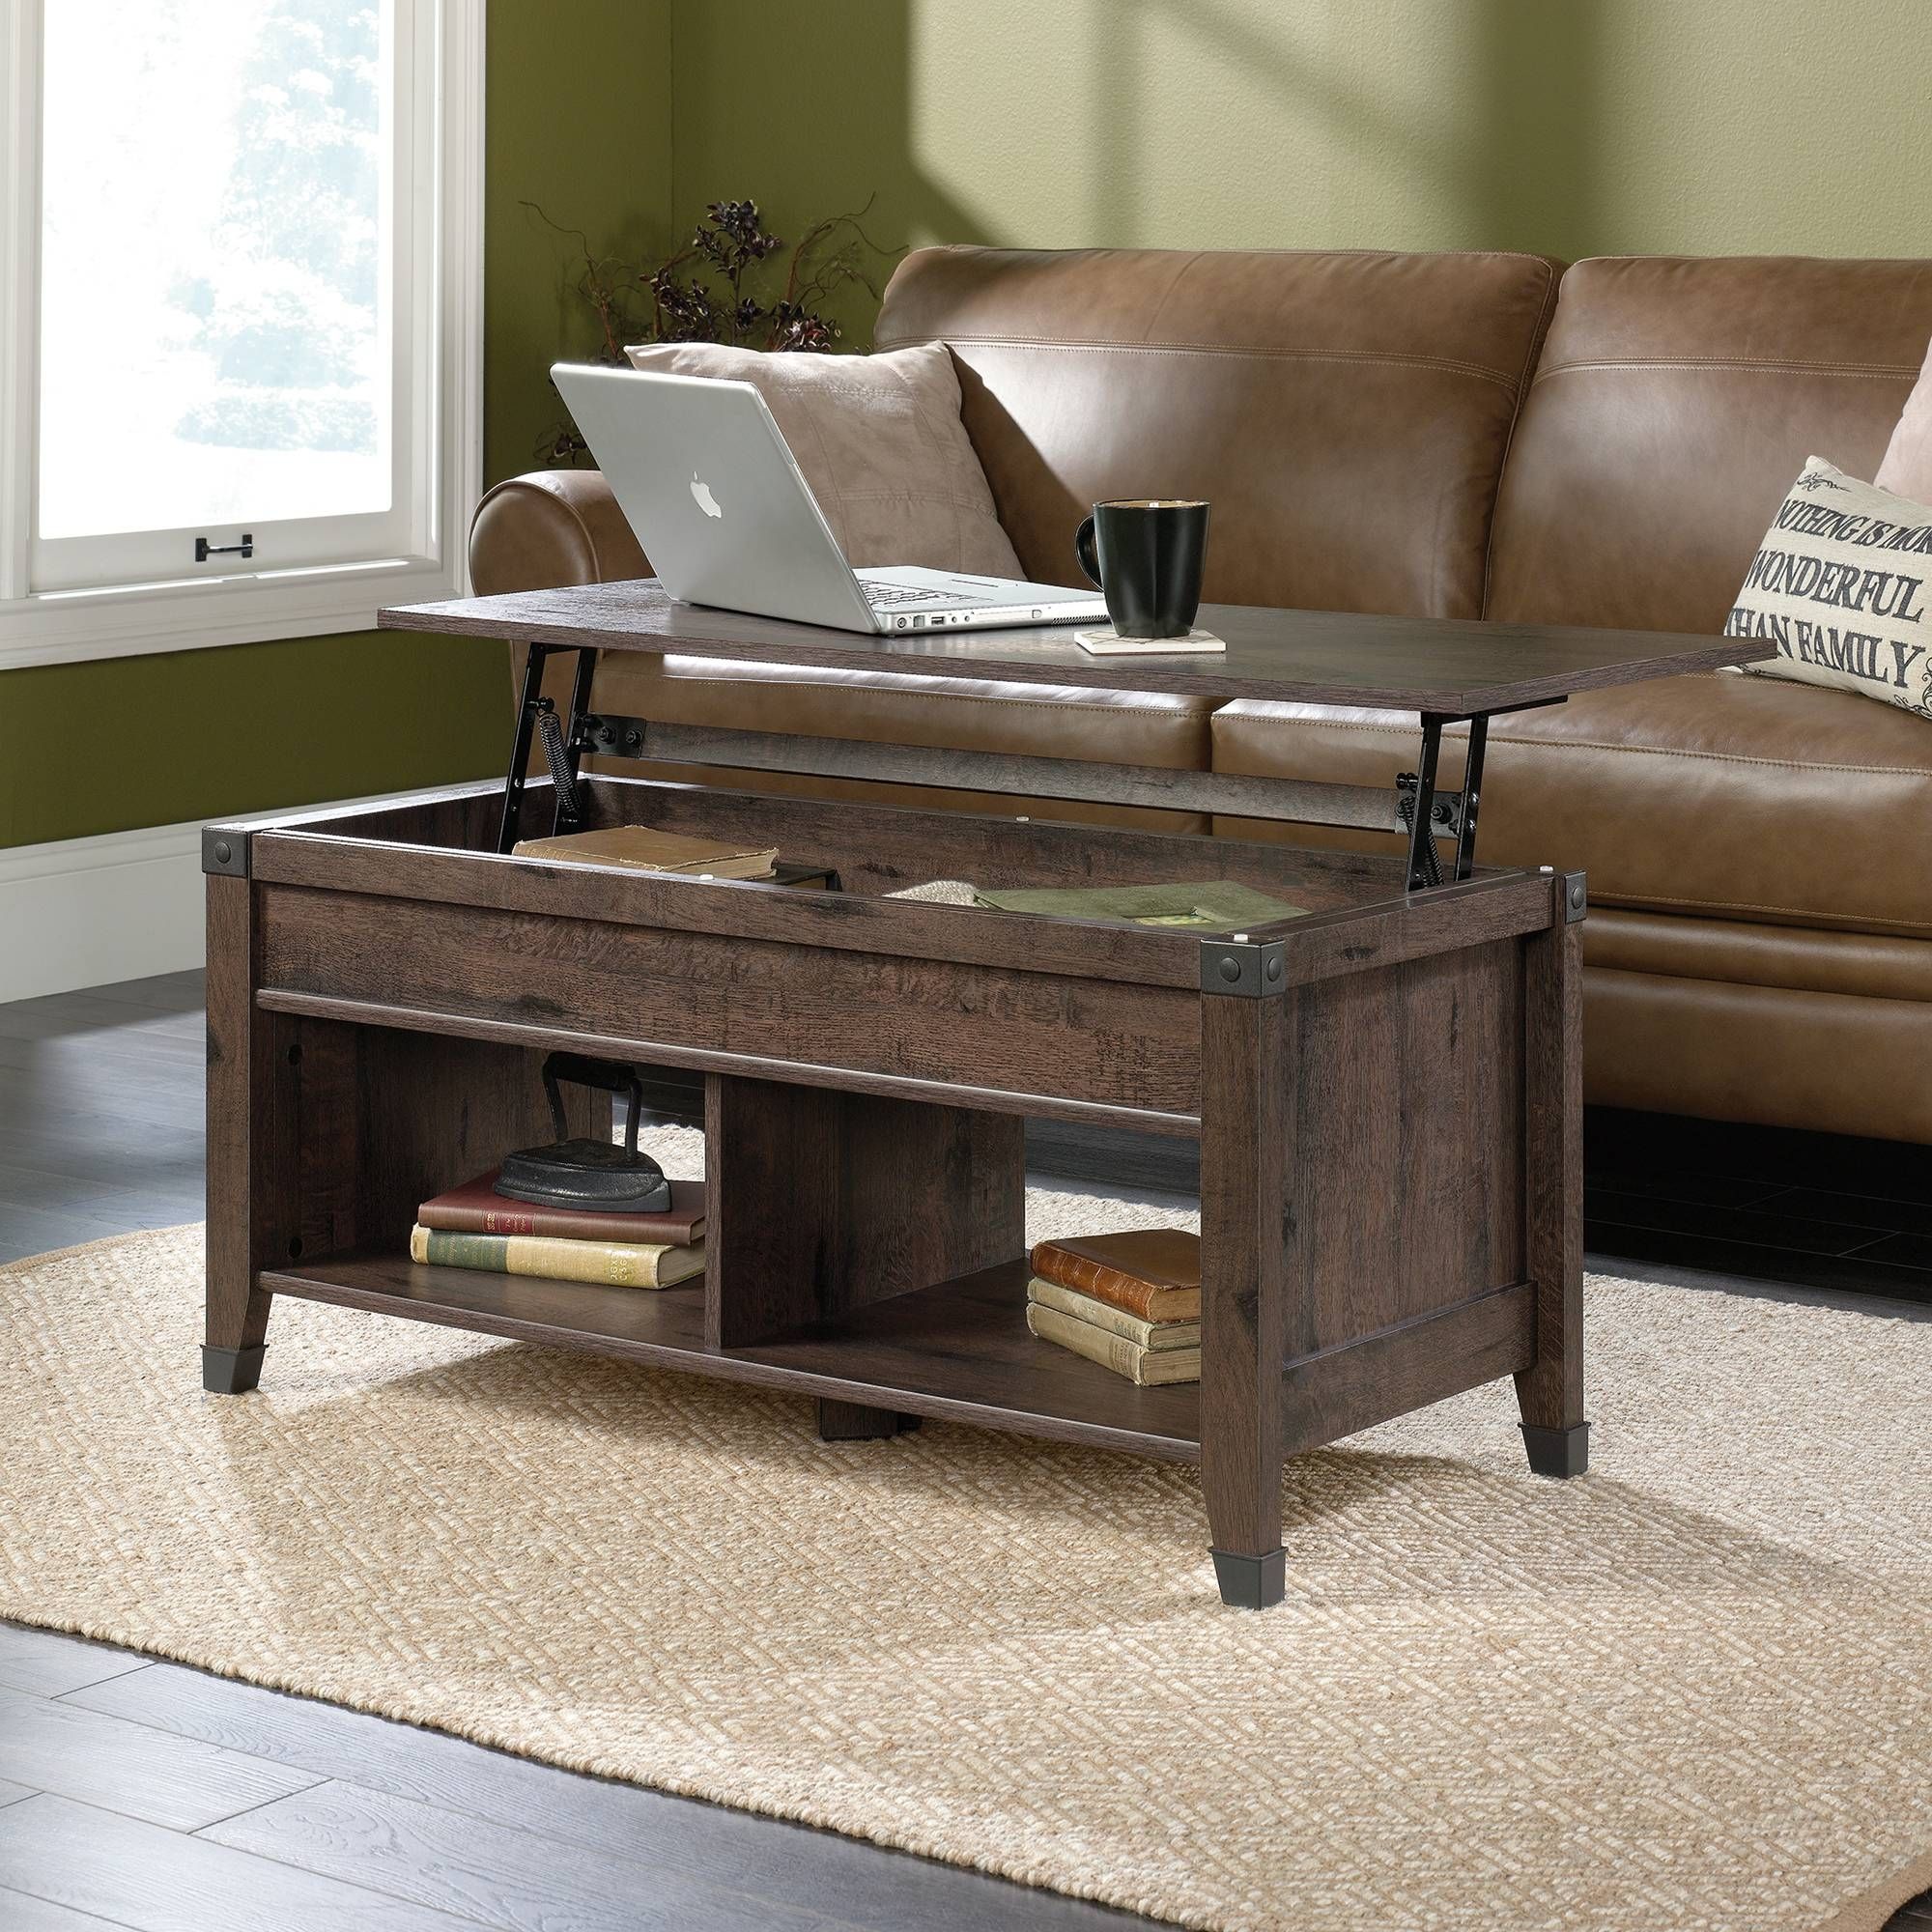 Carson Forge | Lift Top Coffee Table | 420421 | Sauder With Regard To Lift Top Oak Coffee Tables (View 26 of 30)